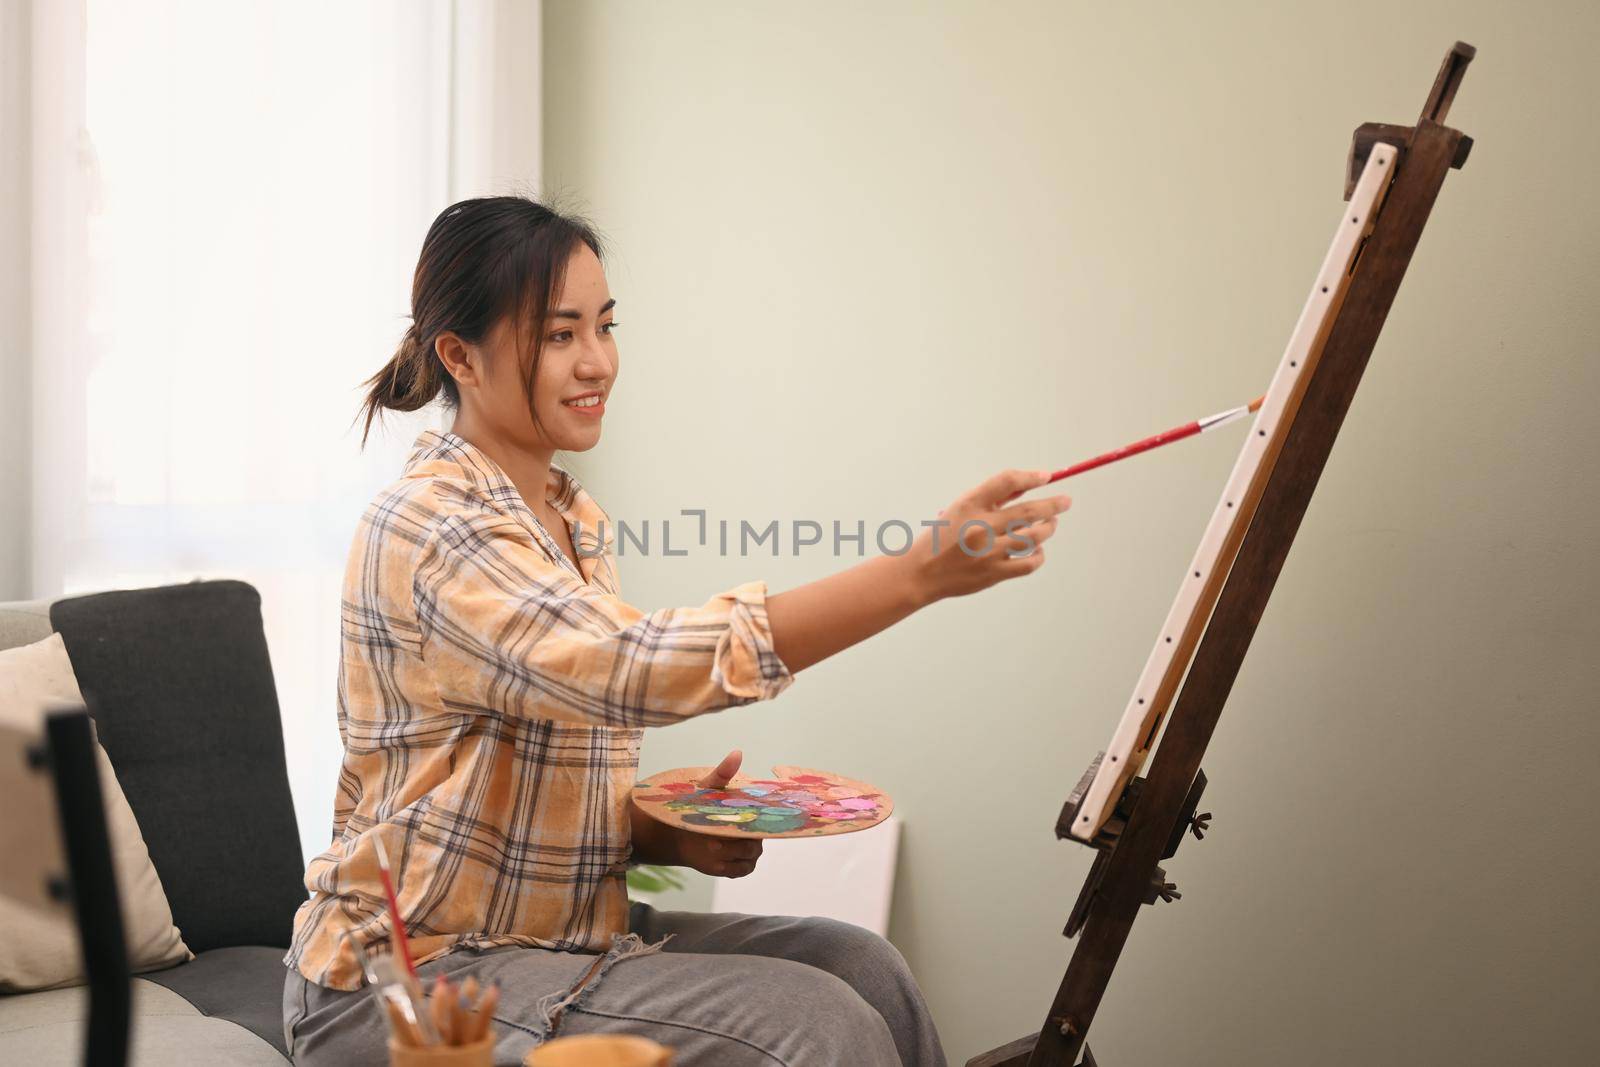 Satisfied female painter painting on easel with watercolor in comfortable workshop. Leisure activity, creative hobby and art concept.